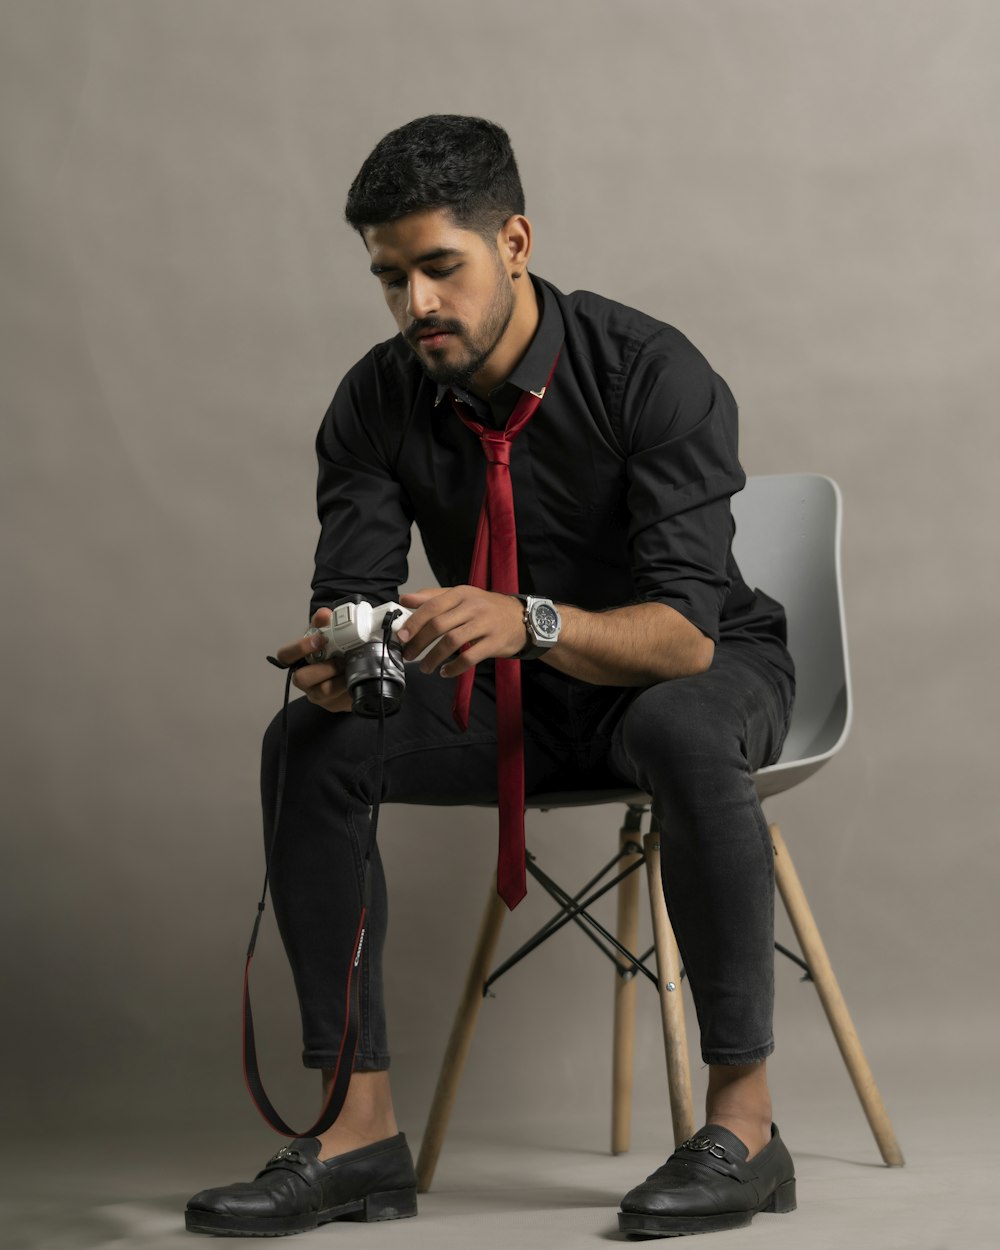 a man sitting on a chair holding a camera